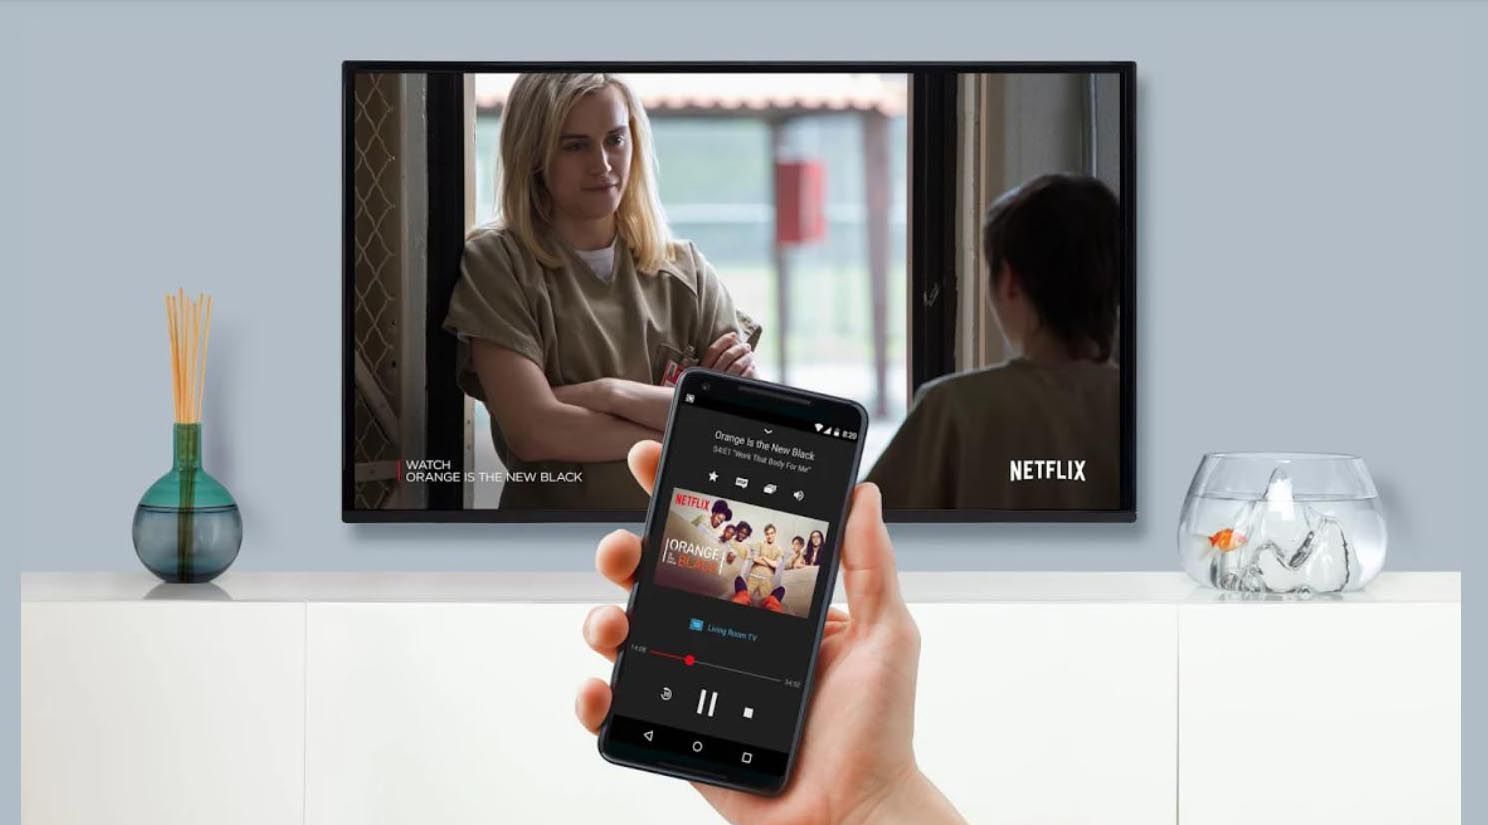 How To Connect Netflix To Tv From Phone Without Wifi